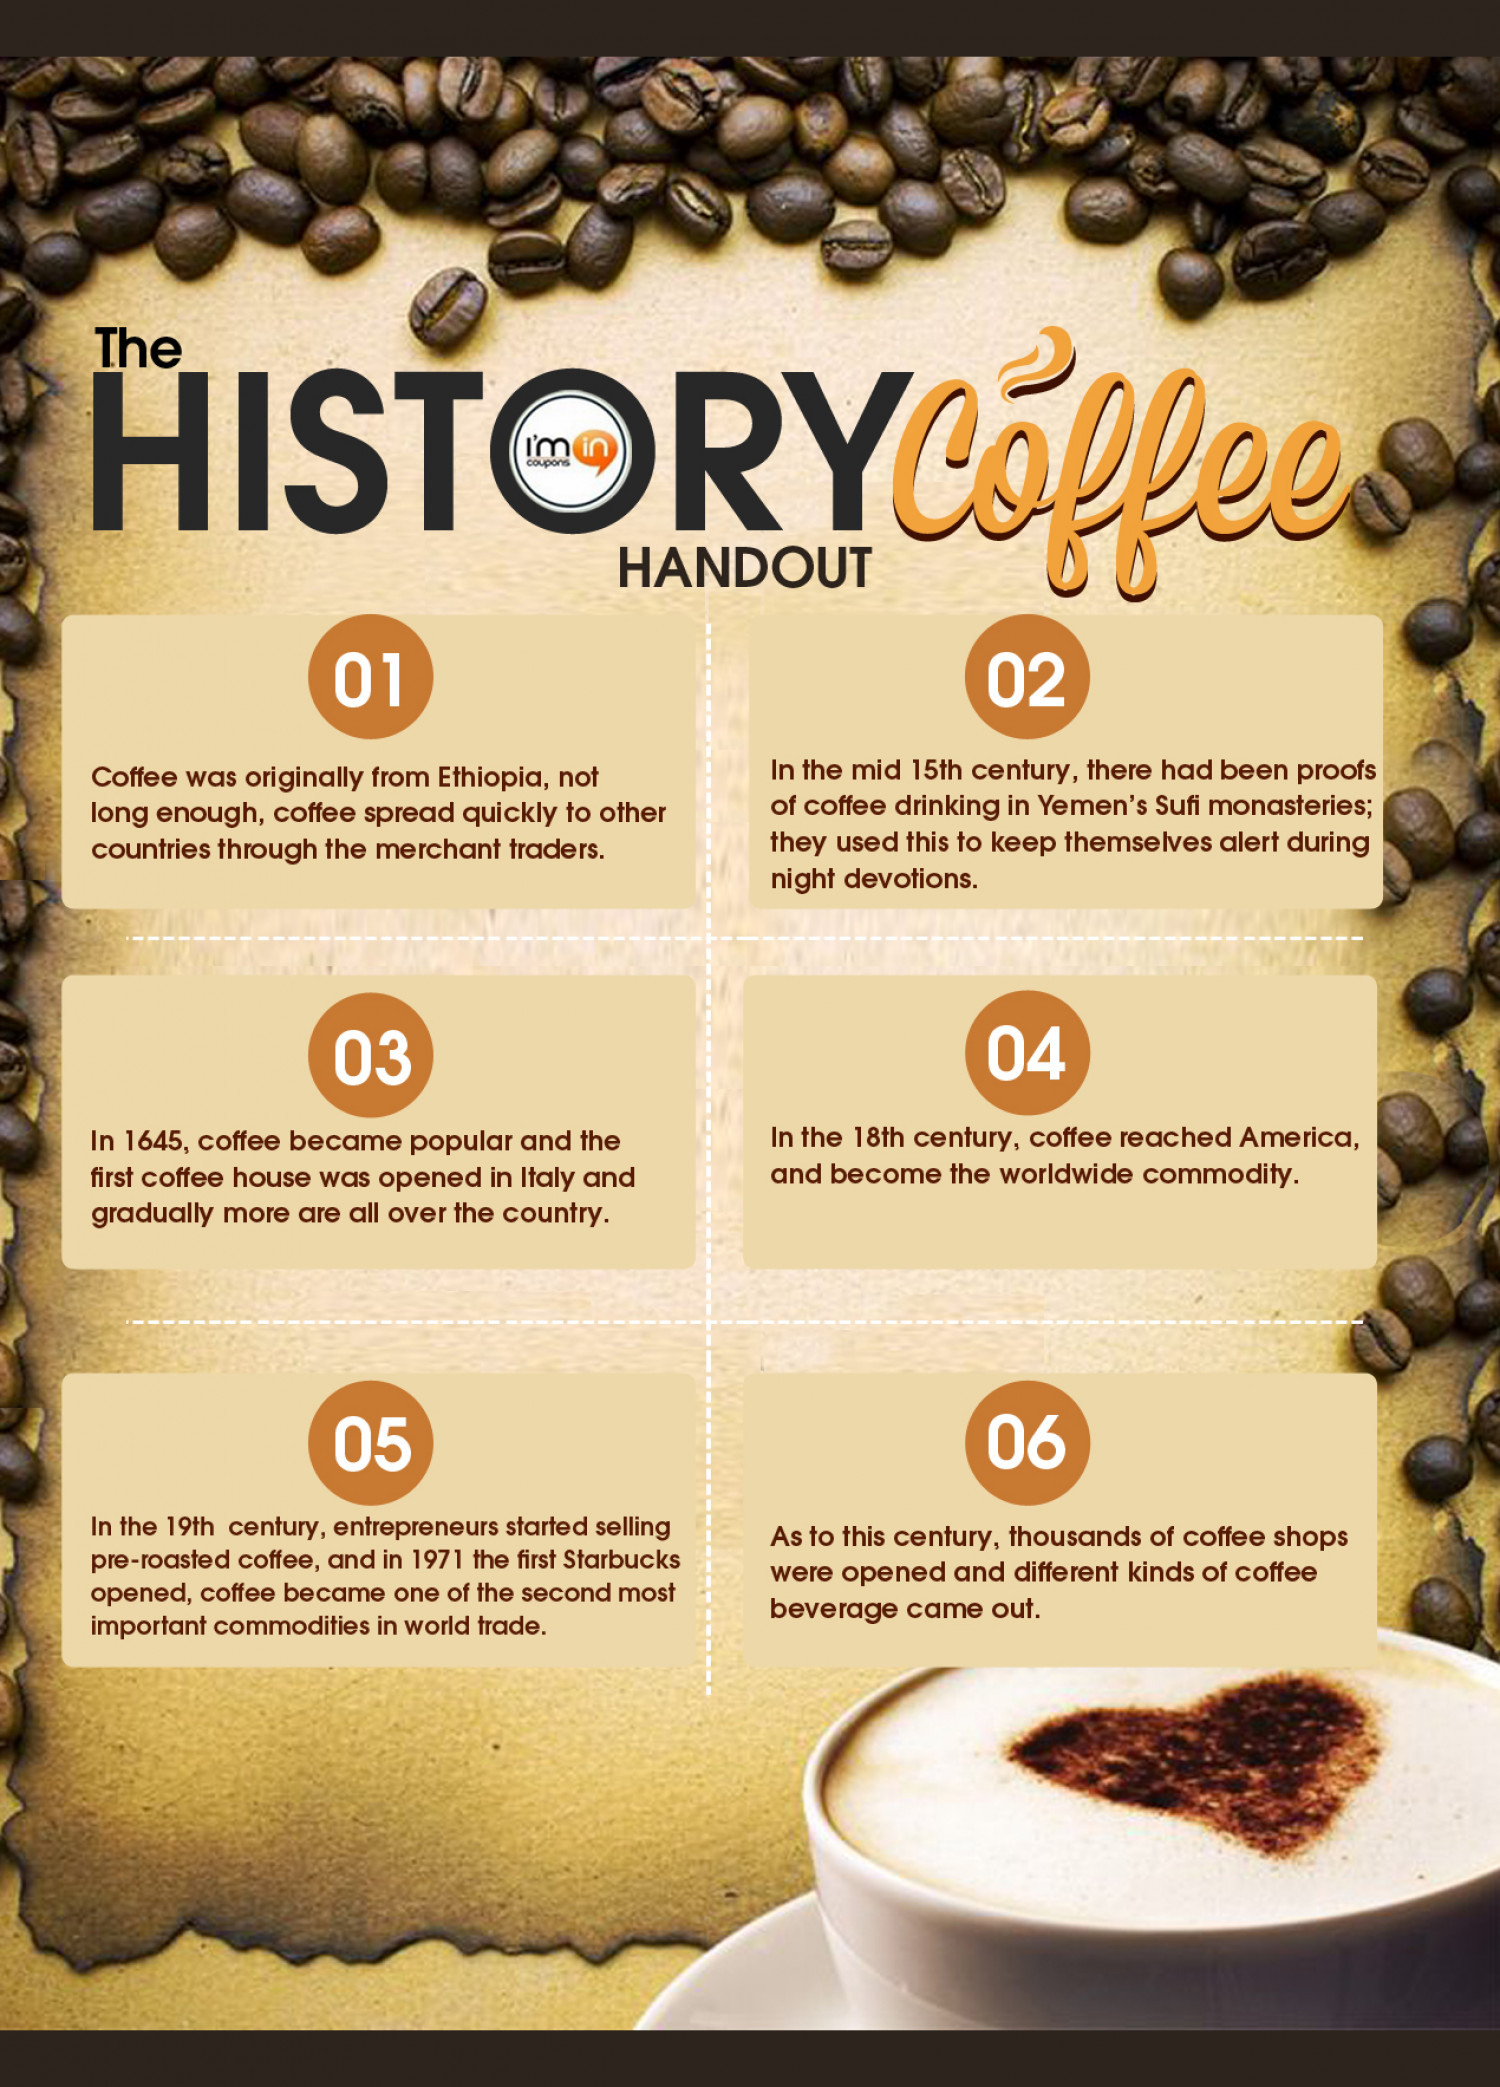 20 Most Interesting Facts About Coffee You Should Know | The Kuju Journal | Coffee facts, Coffee ...